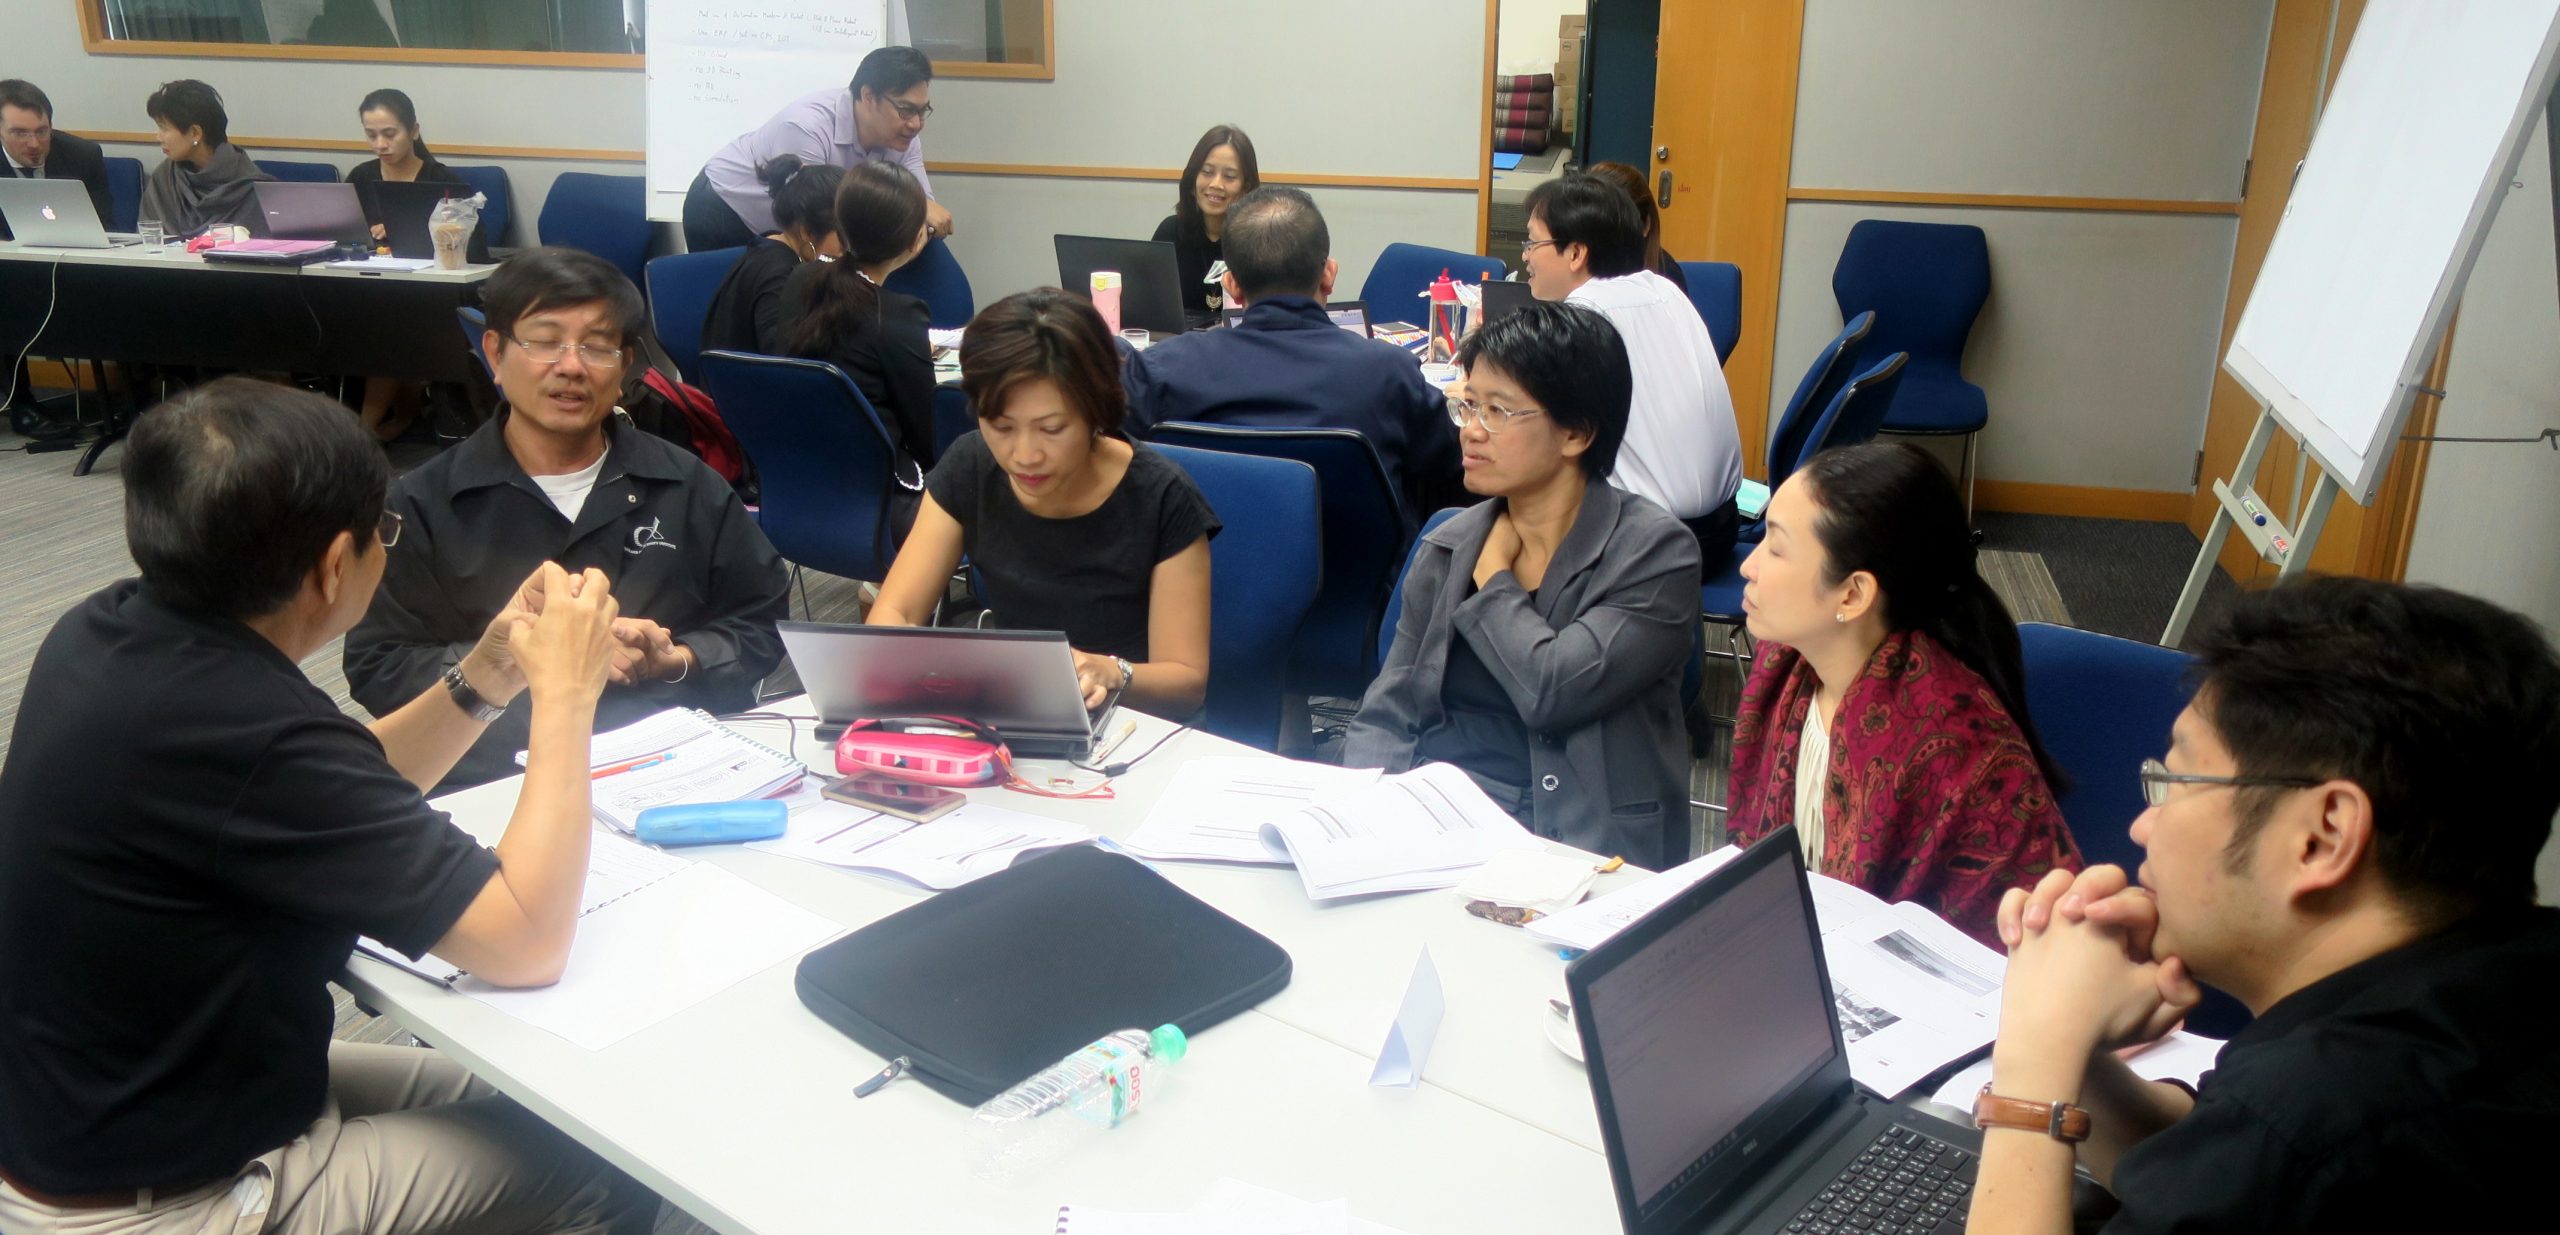 Participants conducting a readiness assessment to determine when the Thai economy can embrace Industry 4.0.